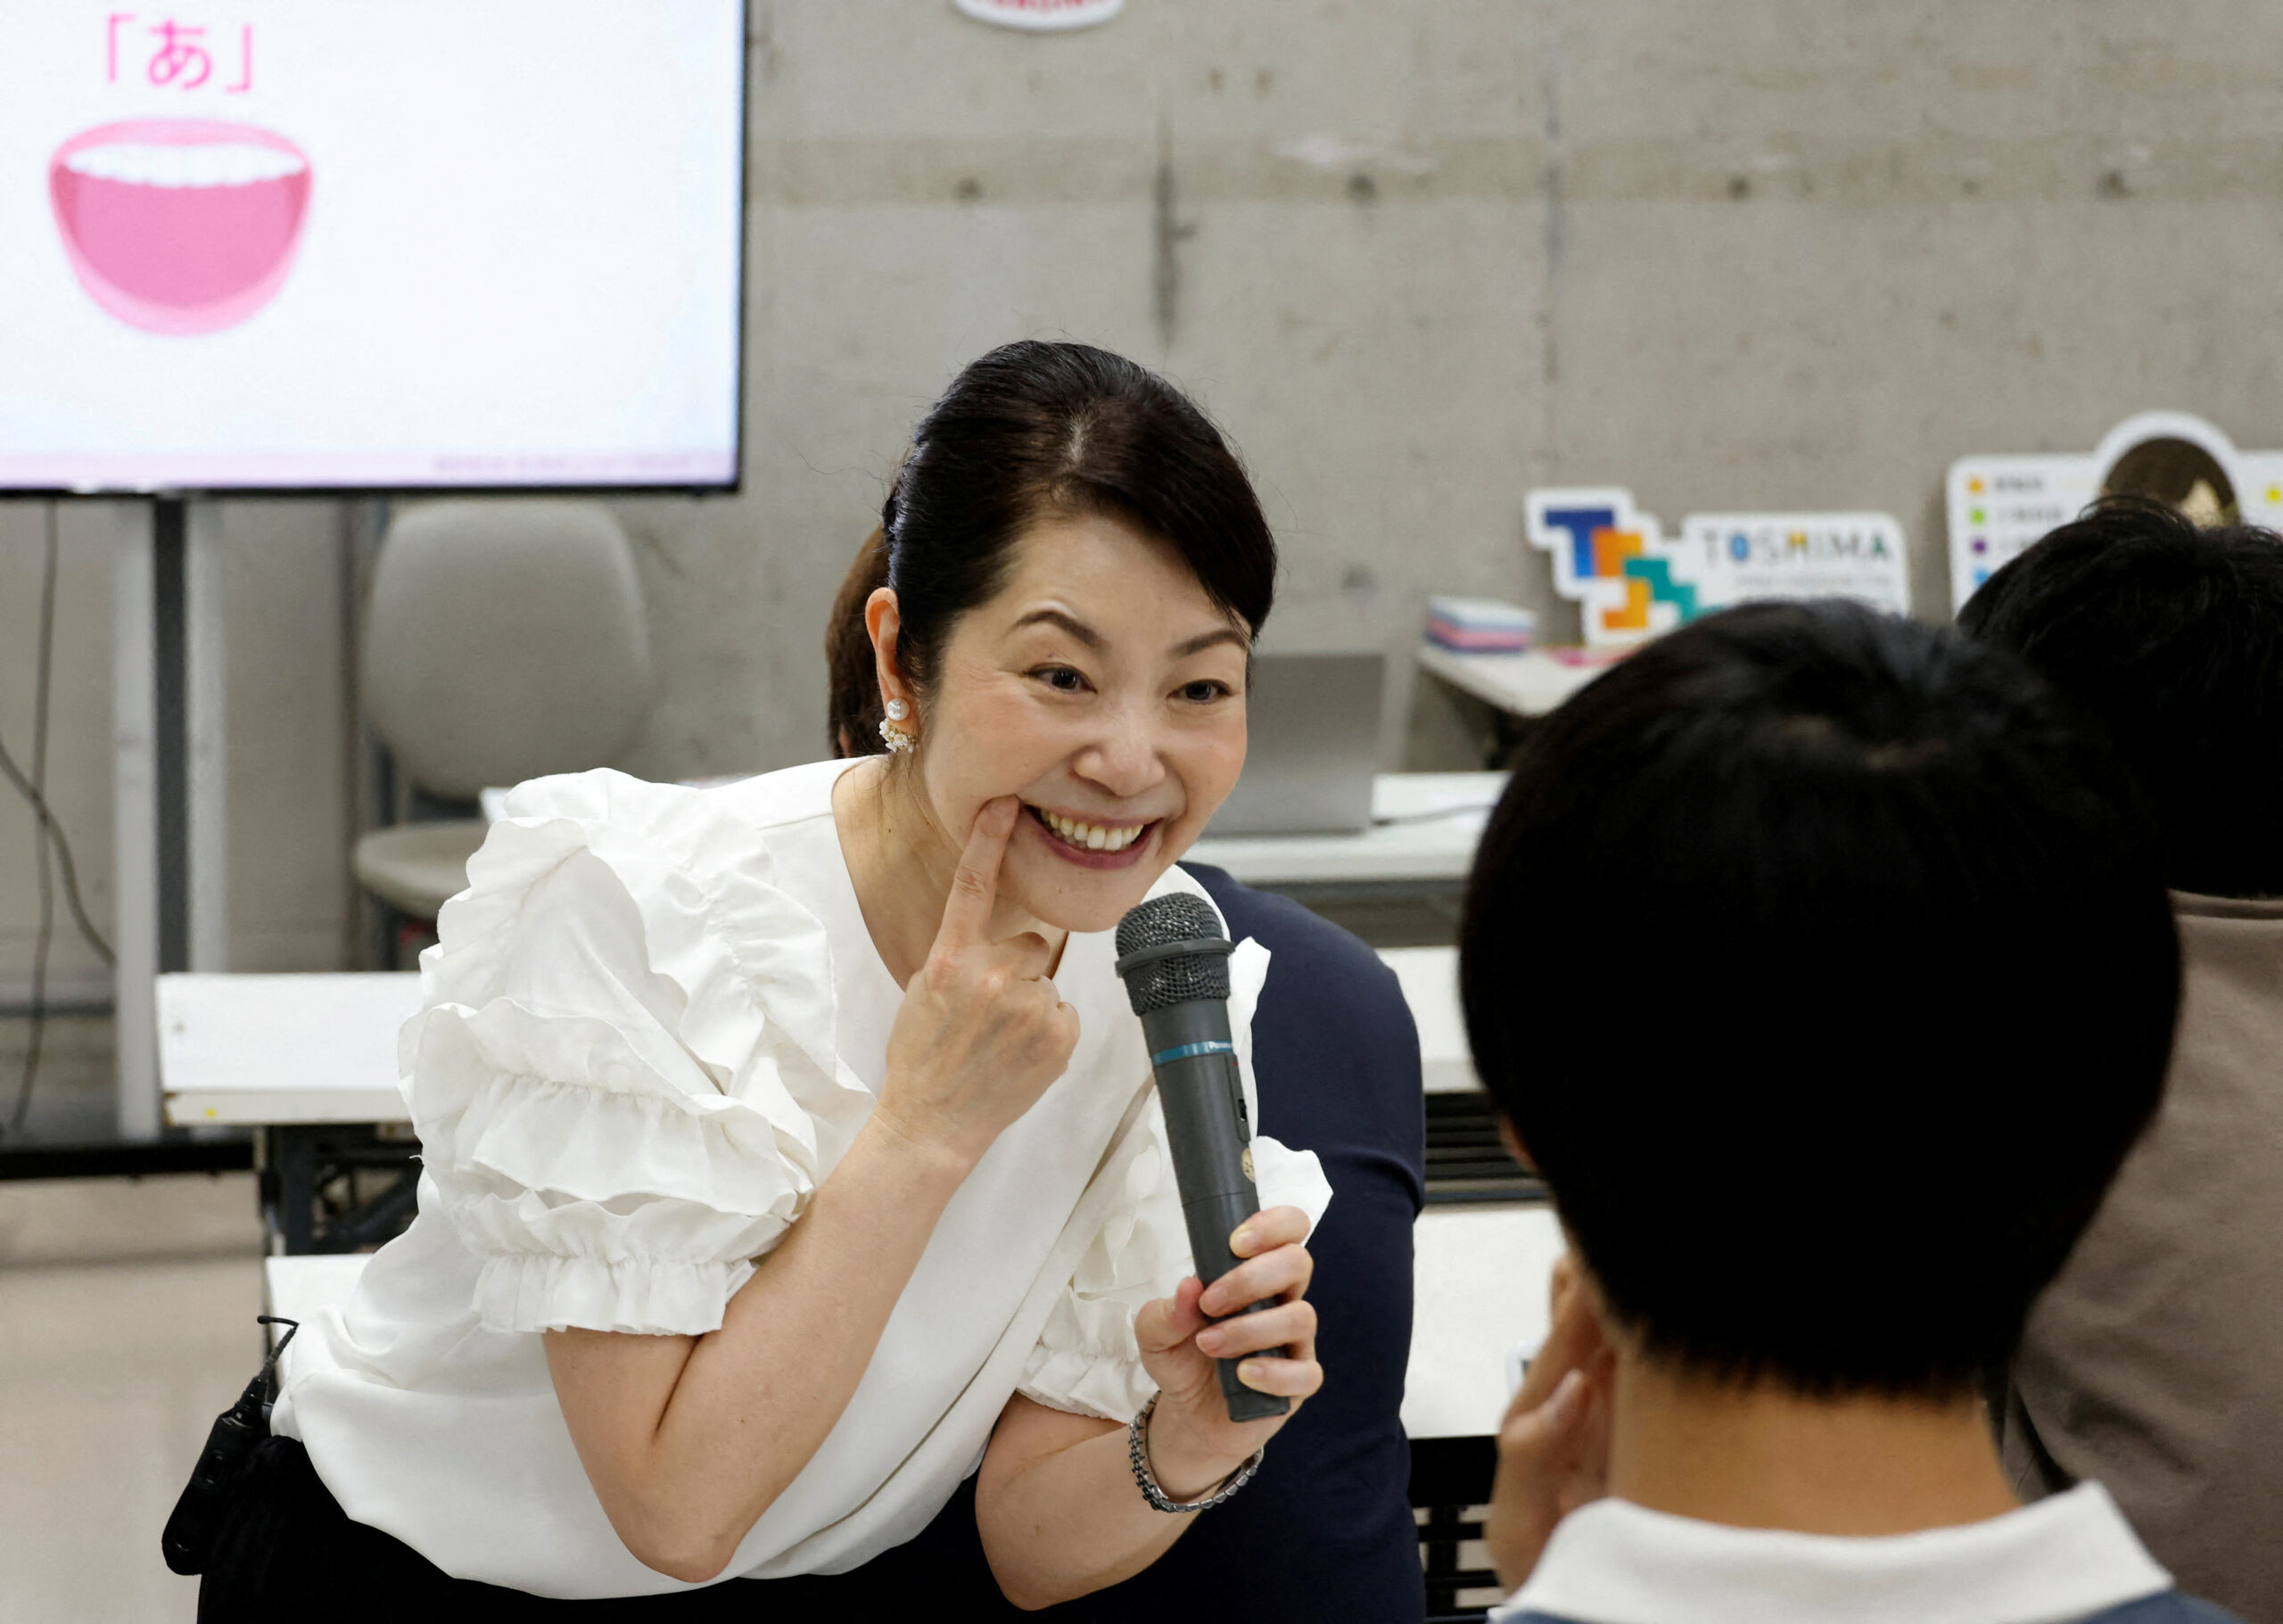 Japanese get trained to smile as masks slowly come off | Inquirer News